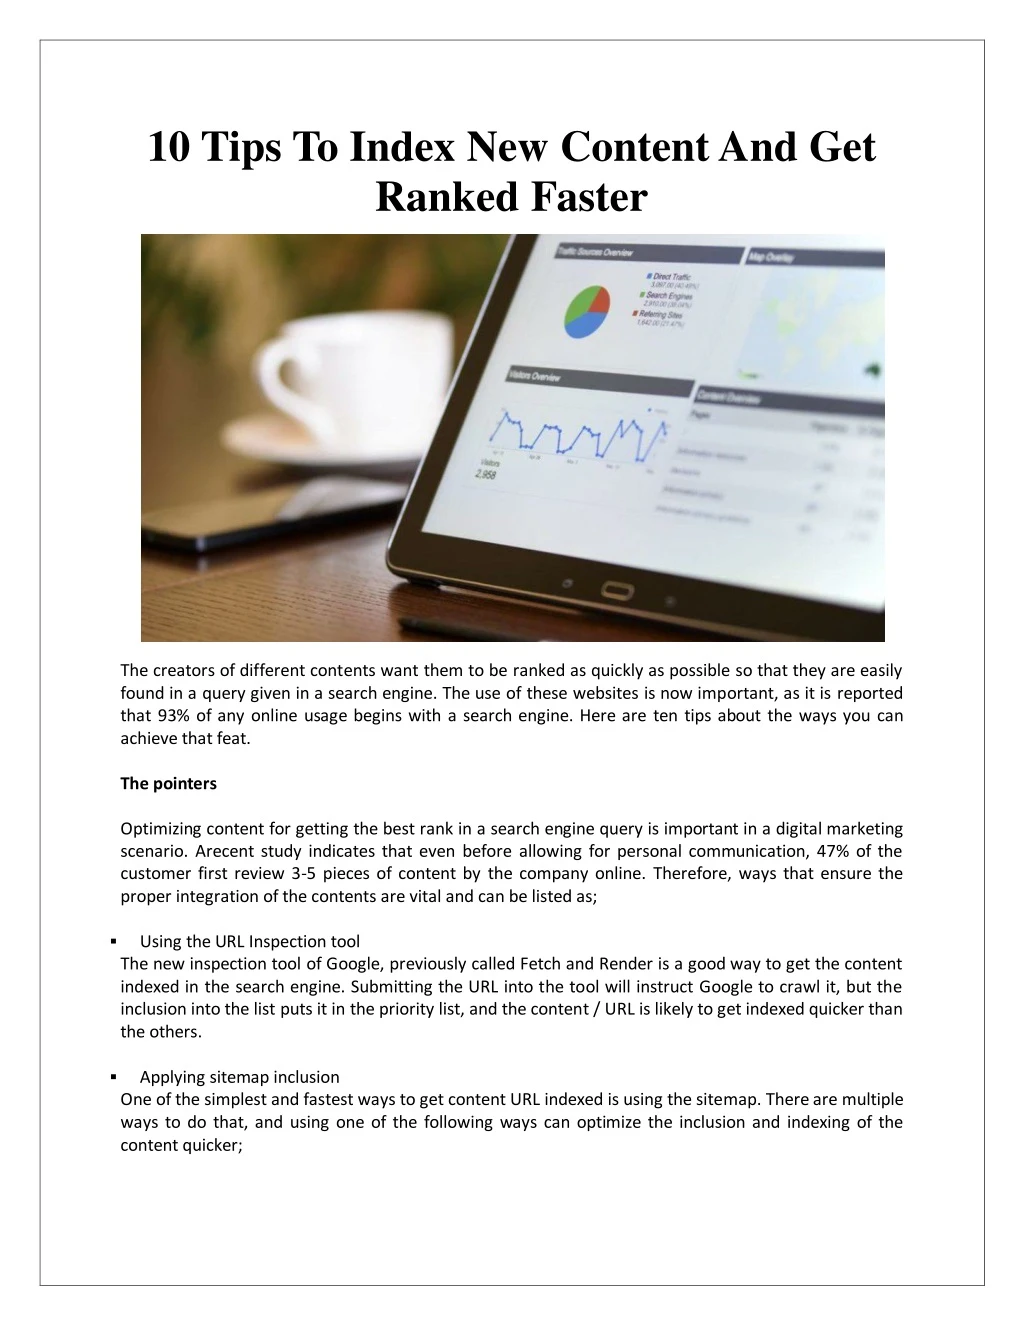 10 tips to index new content and get ranked faster